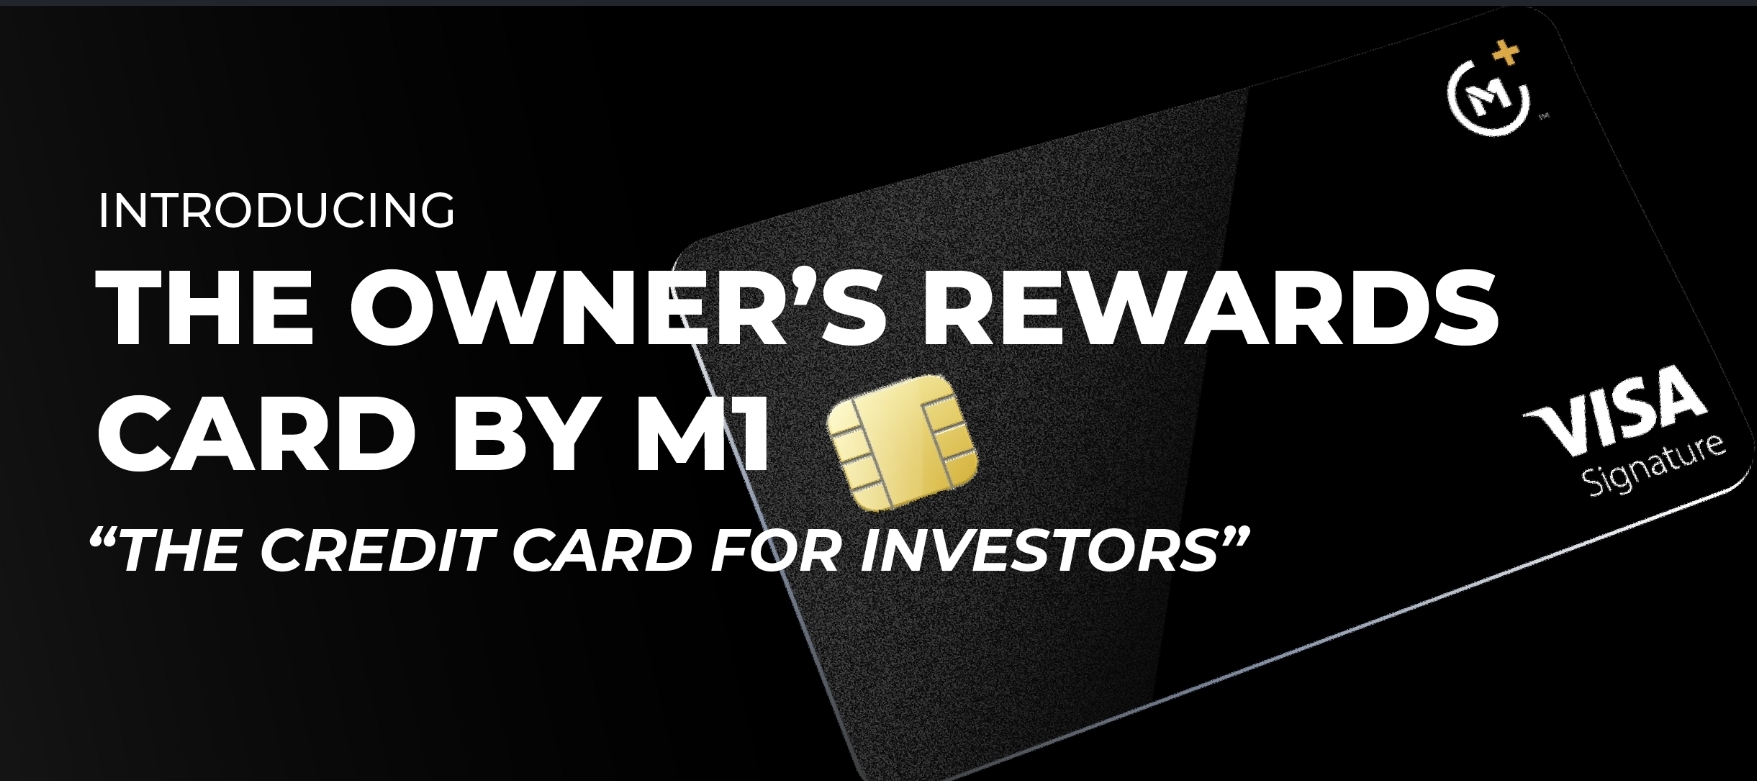 How To Earn 10% Cashback With The M1 Finance Rewards Card! - 1